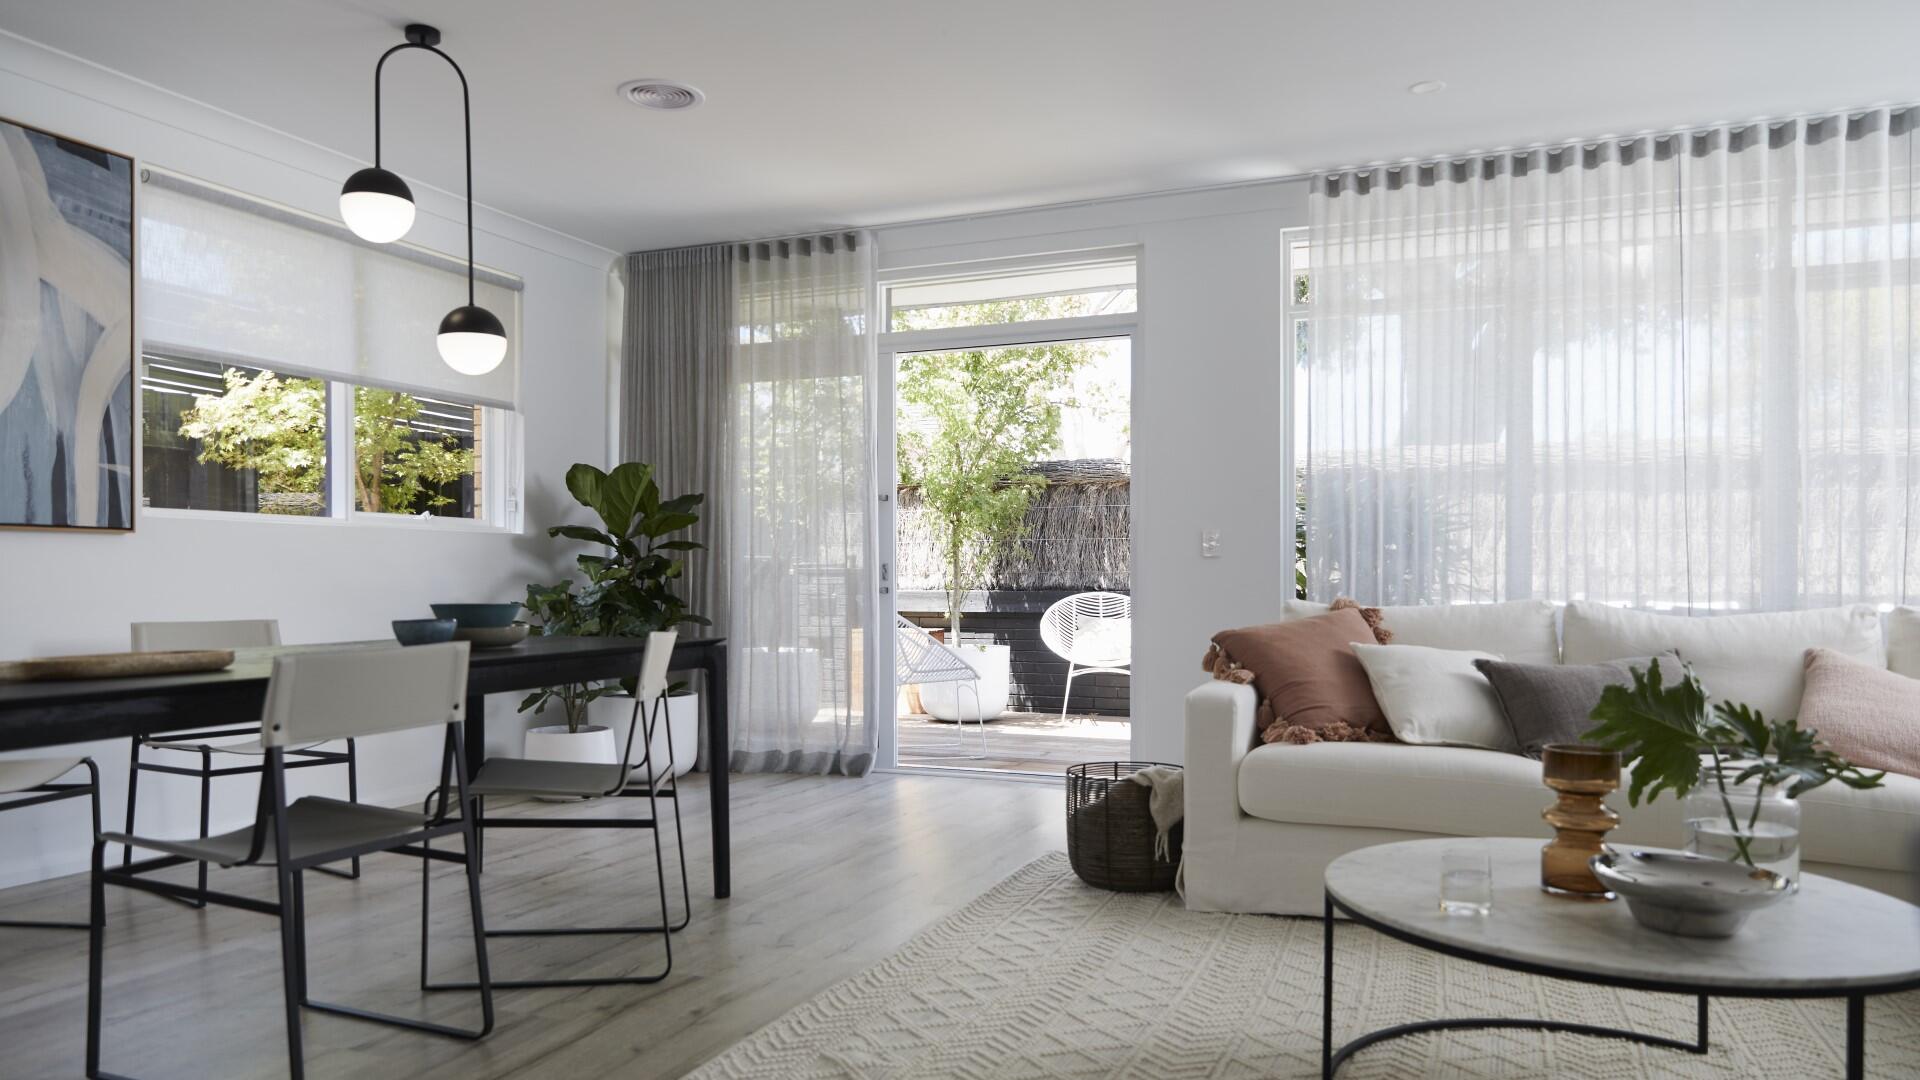 How to choose the best type of blinds and curtains for your home